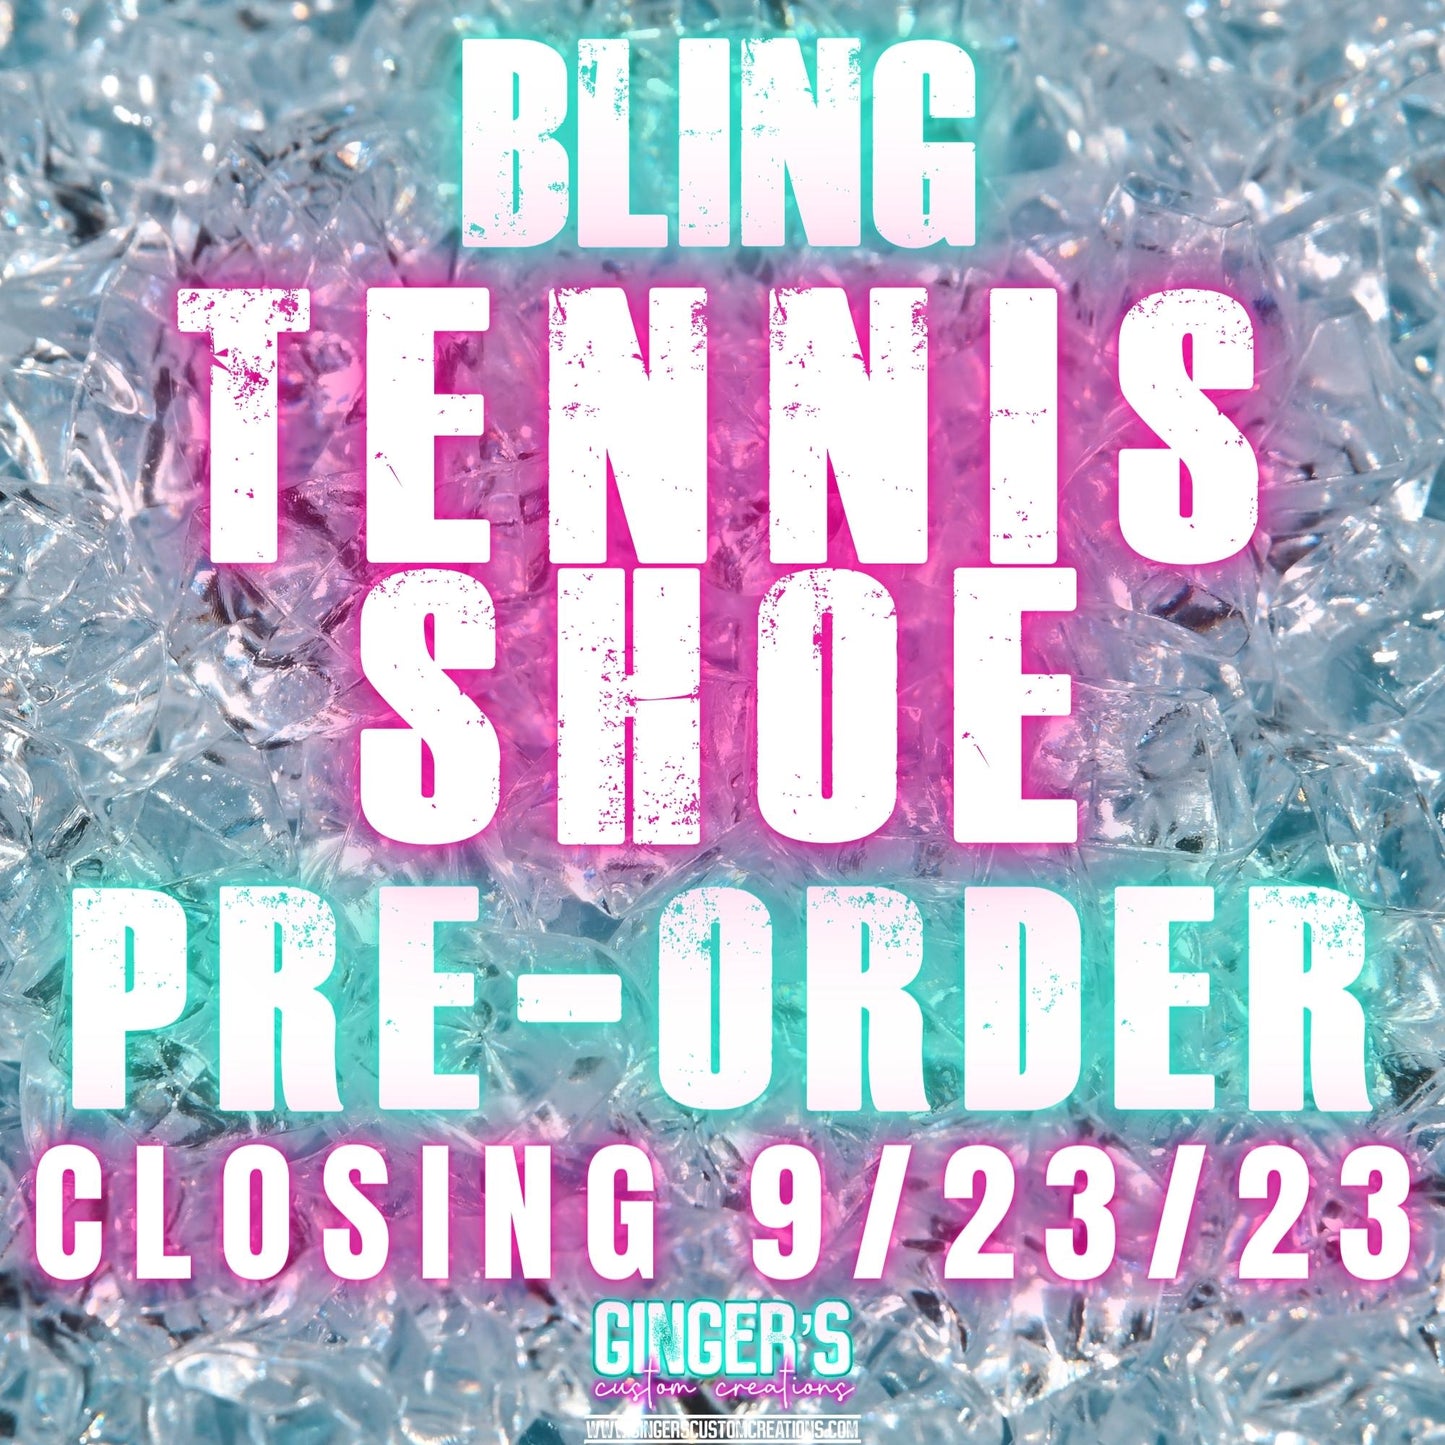 BLING - STUDDED SHOE PRE-ORDER - CLOSES 9/23/23 - ROUND 2